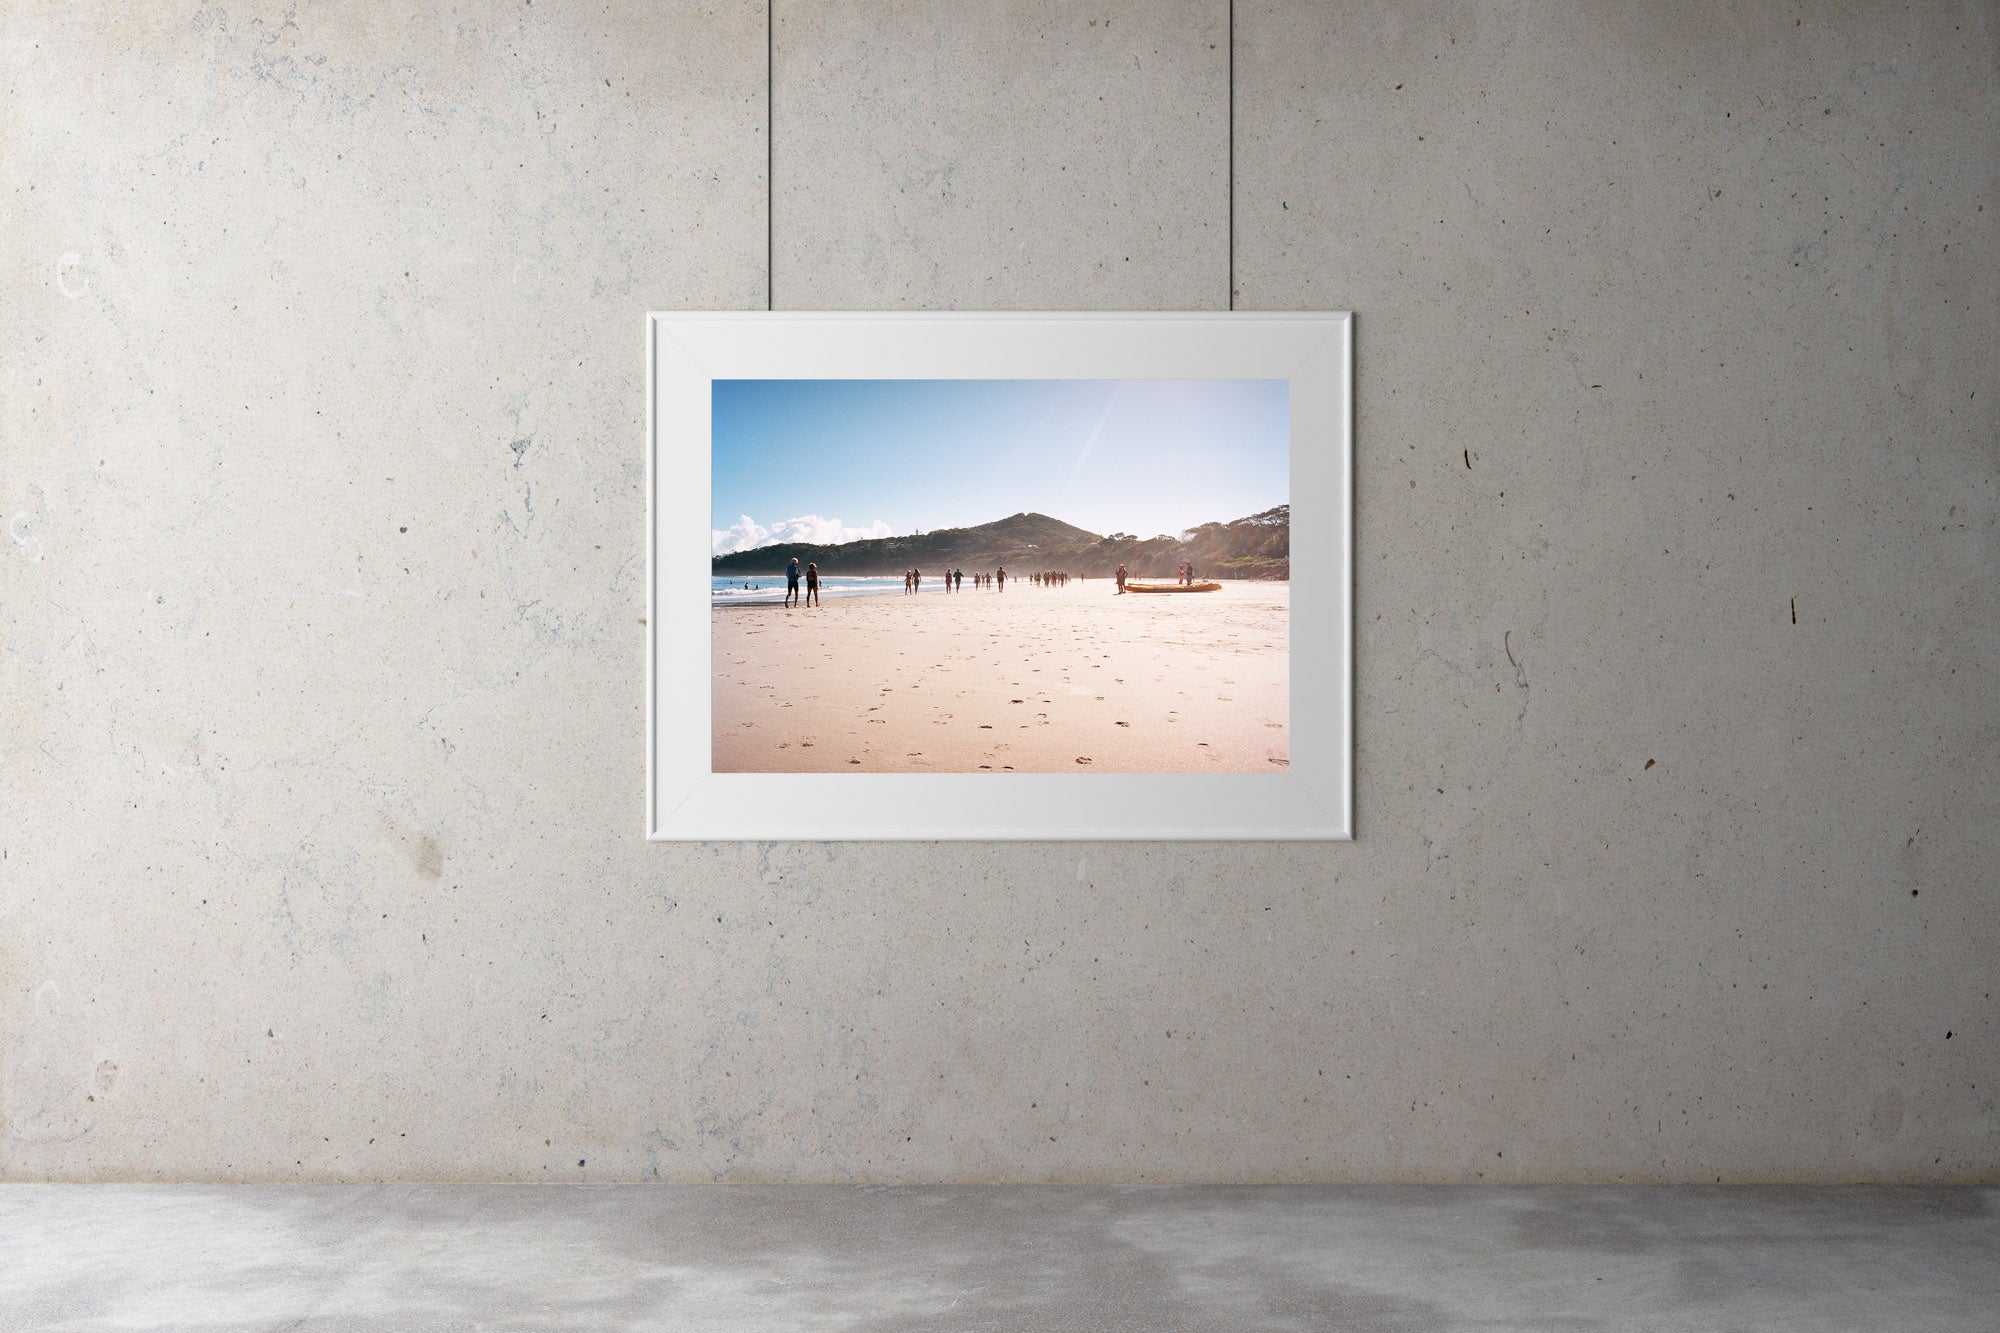 A photography galley with a print on the wall, Byron bay beach with people walking in the distance, blue calm water, blue sky. Two men on a kayak head to the water, Artwork Prints, wall art, Melbourne travel,  Photographic prints,  Framed artwork,  Australian  Photography, wall art, beach prints, coastal prints, ocean prints,  Film photography, Vintage photo, style  Interior design, Pictures Abstract film photography, photography art, Australia, sun, beach, Byron bay,